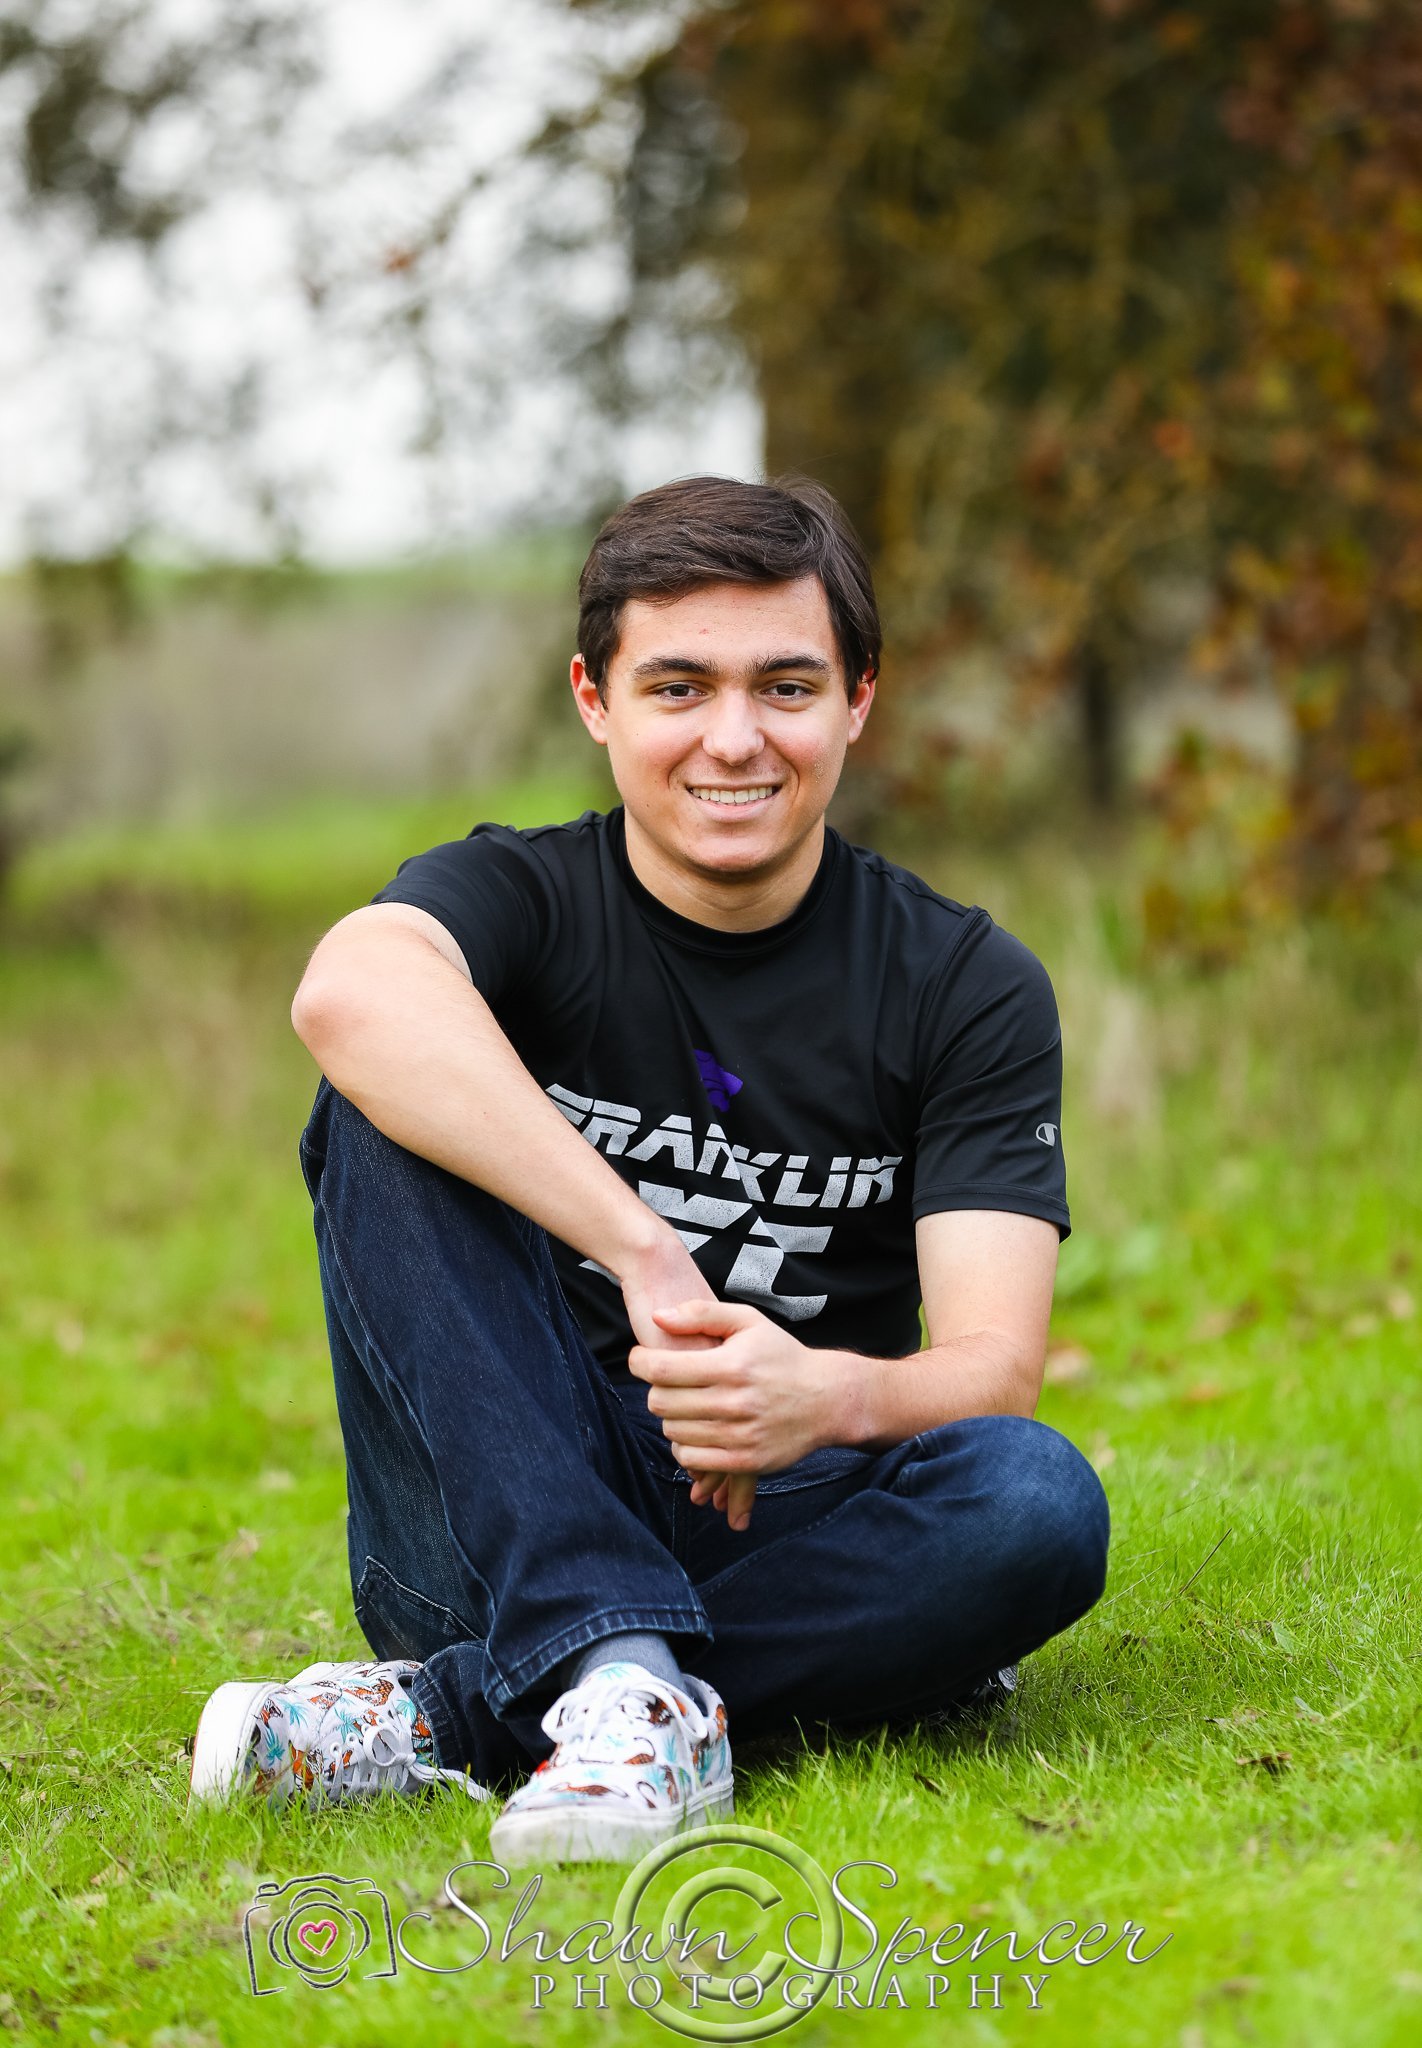 Stephen Wend-Bell Senior Photos — Shawn Spencer Photography